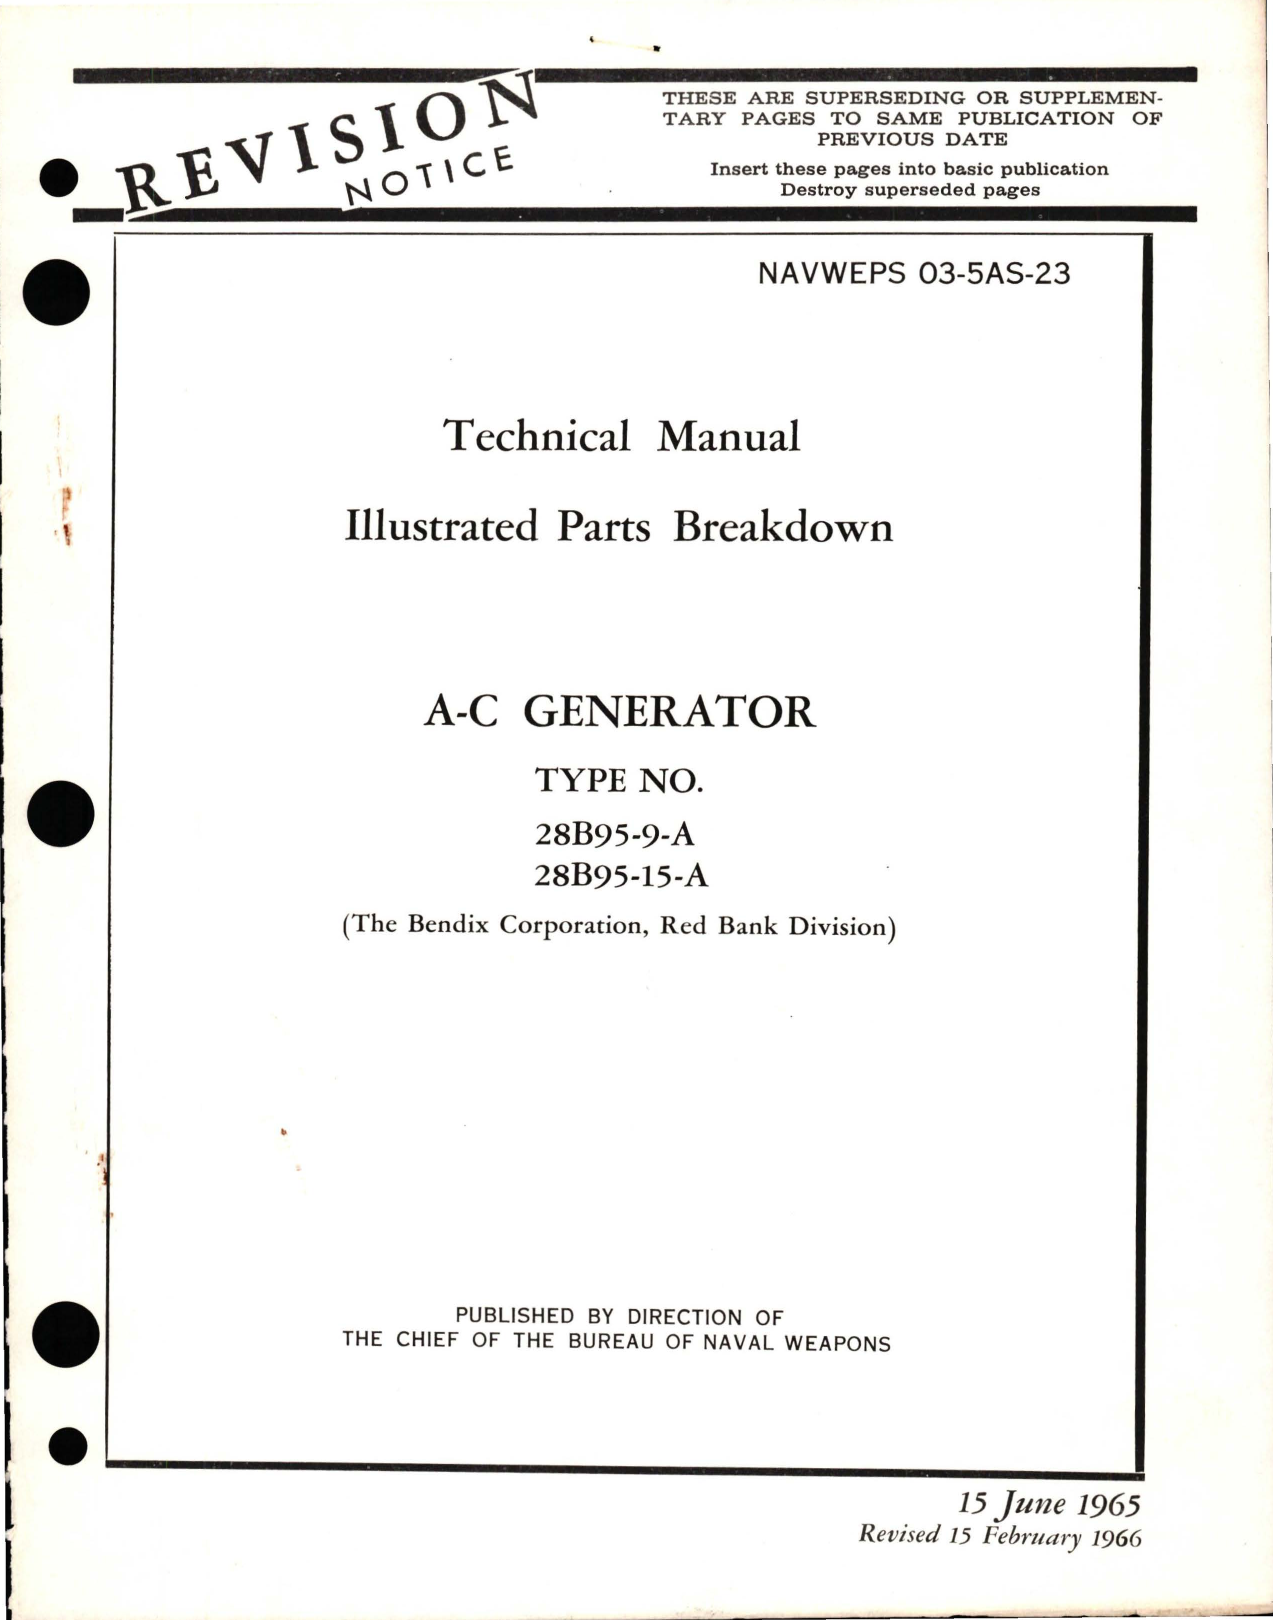 Sample page 1 from AirCorps Library document: Illustrated Parts Breakdown for A-C Generator - Types 28B95-9-A and 28B95-15-A 